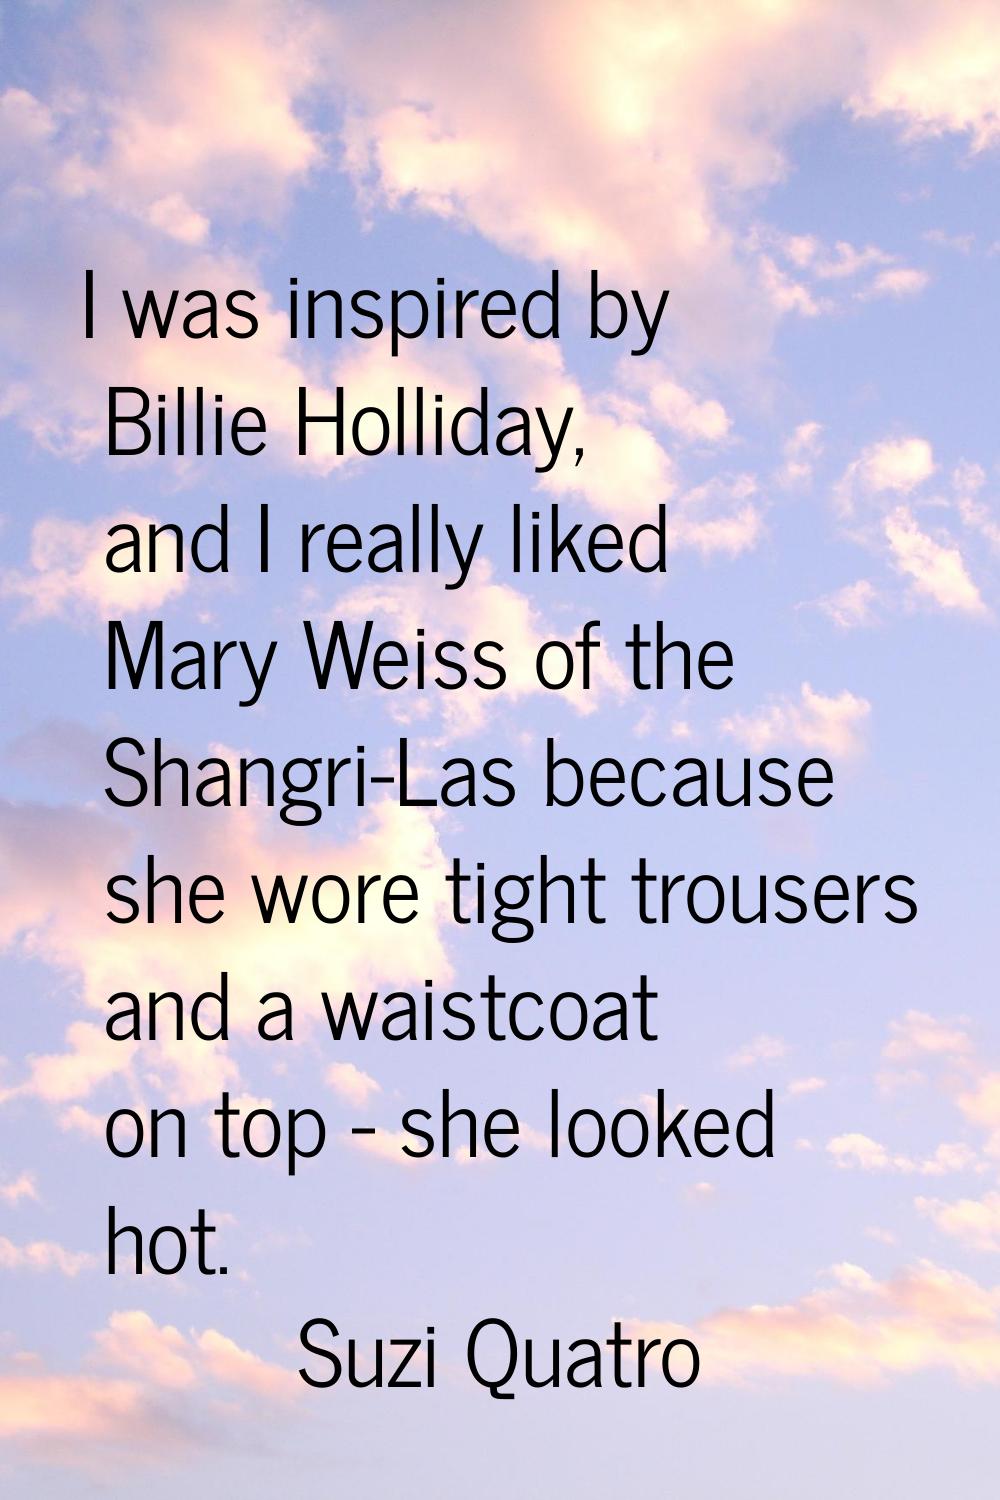 I was inspired by Billie Holliday, and I really liked Mary Weiss of the Shangri-Las because she wor